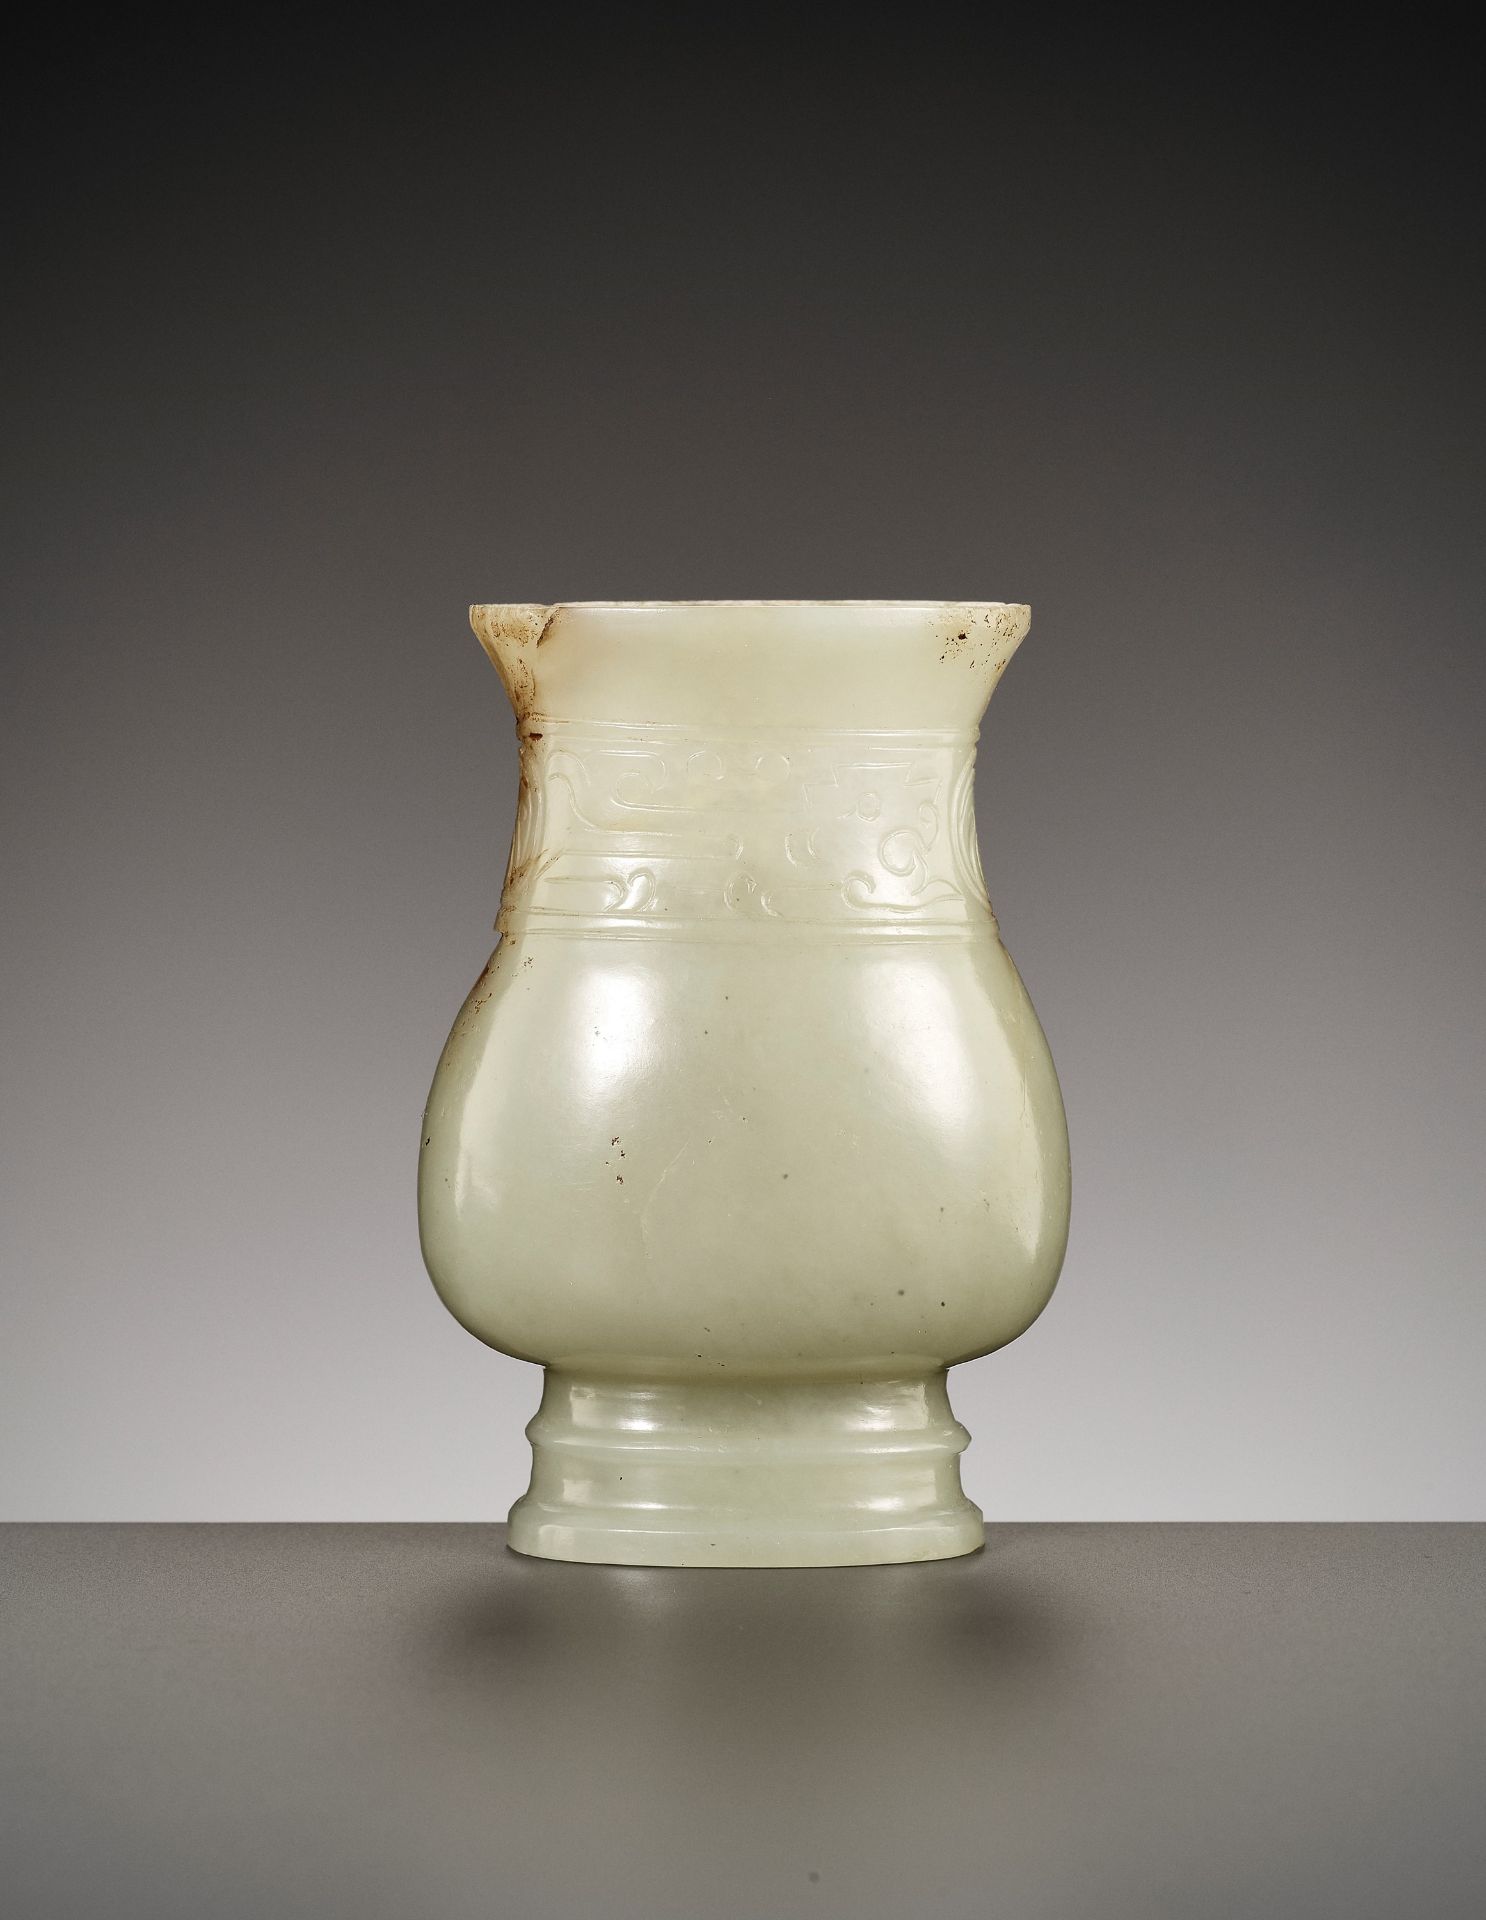 A RARE ARCHAISTIC 'SHANG BRONZE IMITATION' JADE VESSEL, ZHI, LATE SONG TO EARLY MING DYNASTY